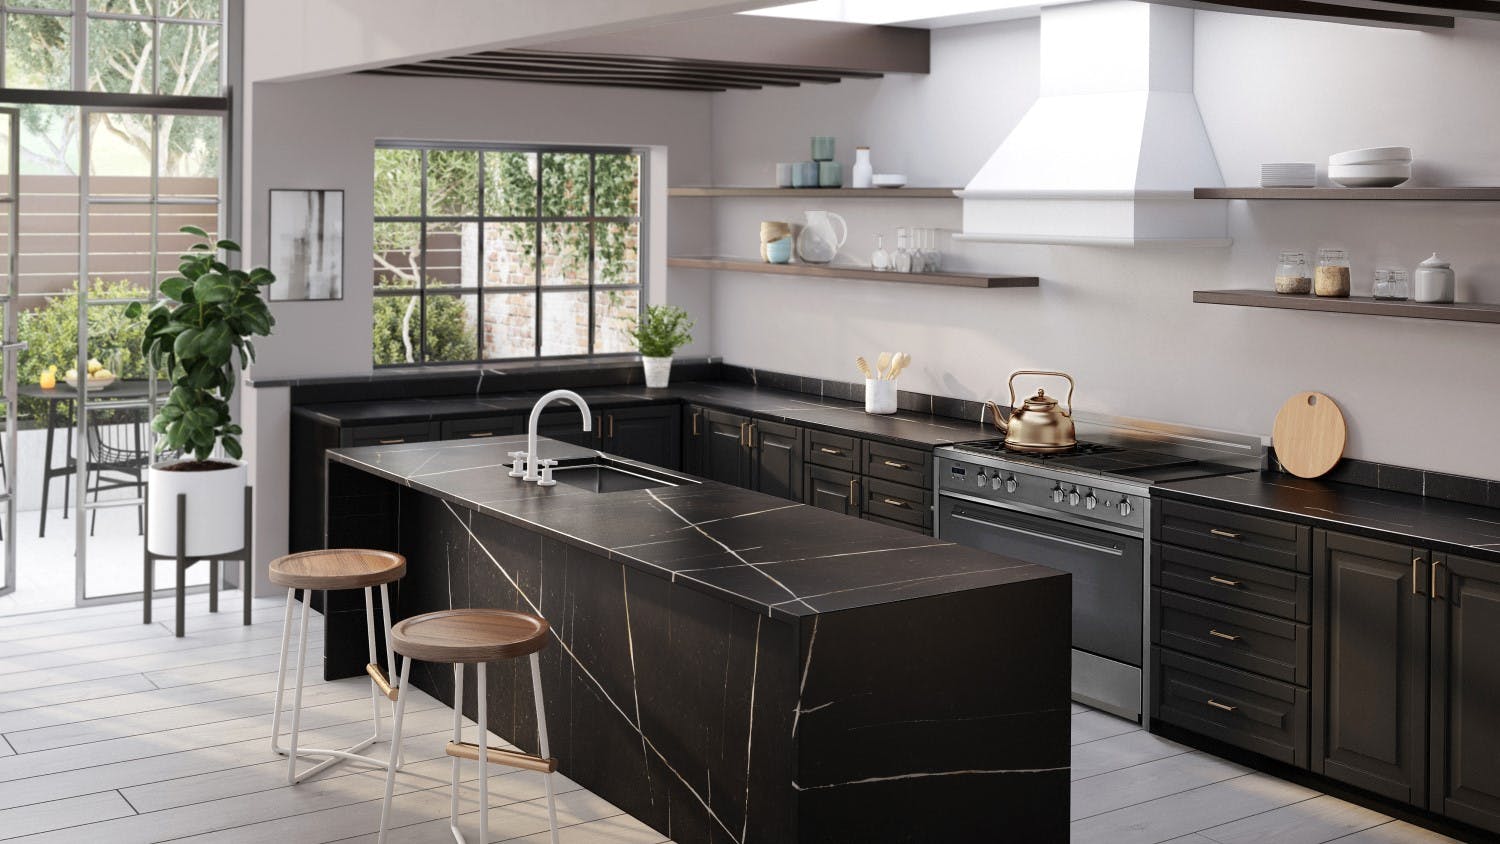 Image 37 of Silestone Eternal Noir Kitchen blog 1 1 in Cosentino, 40 years of international growth and expansion - Cosentino